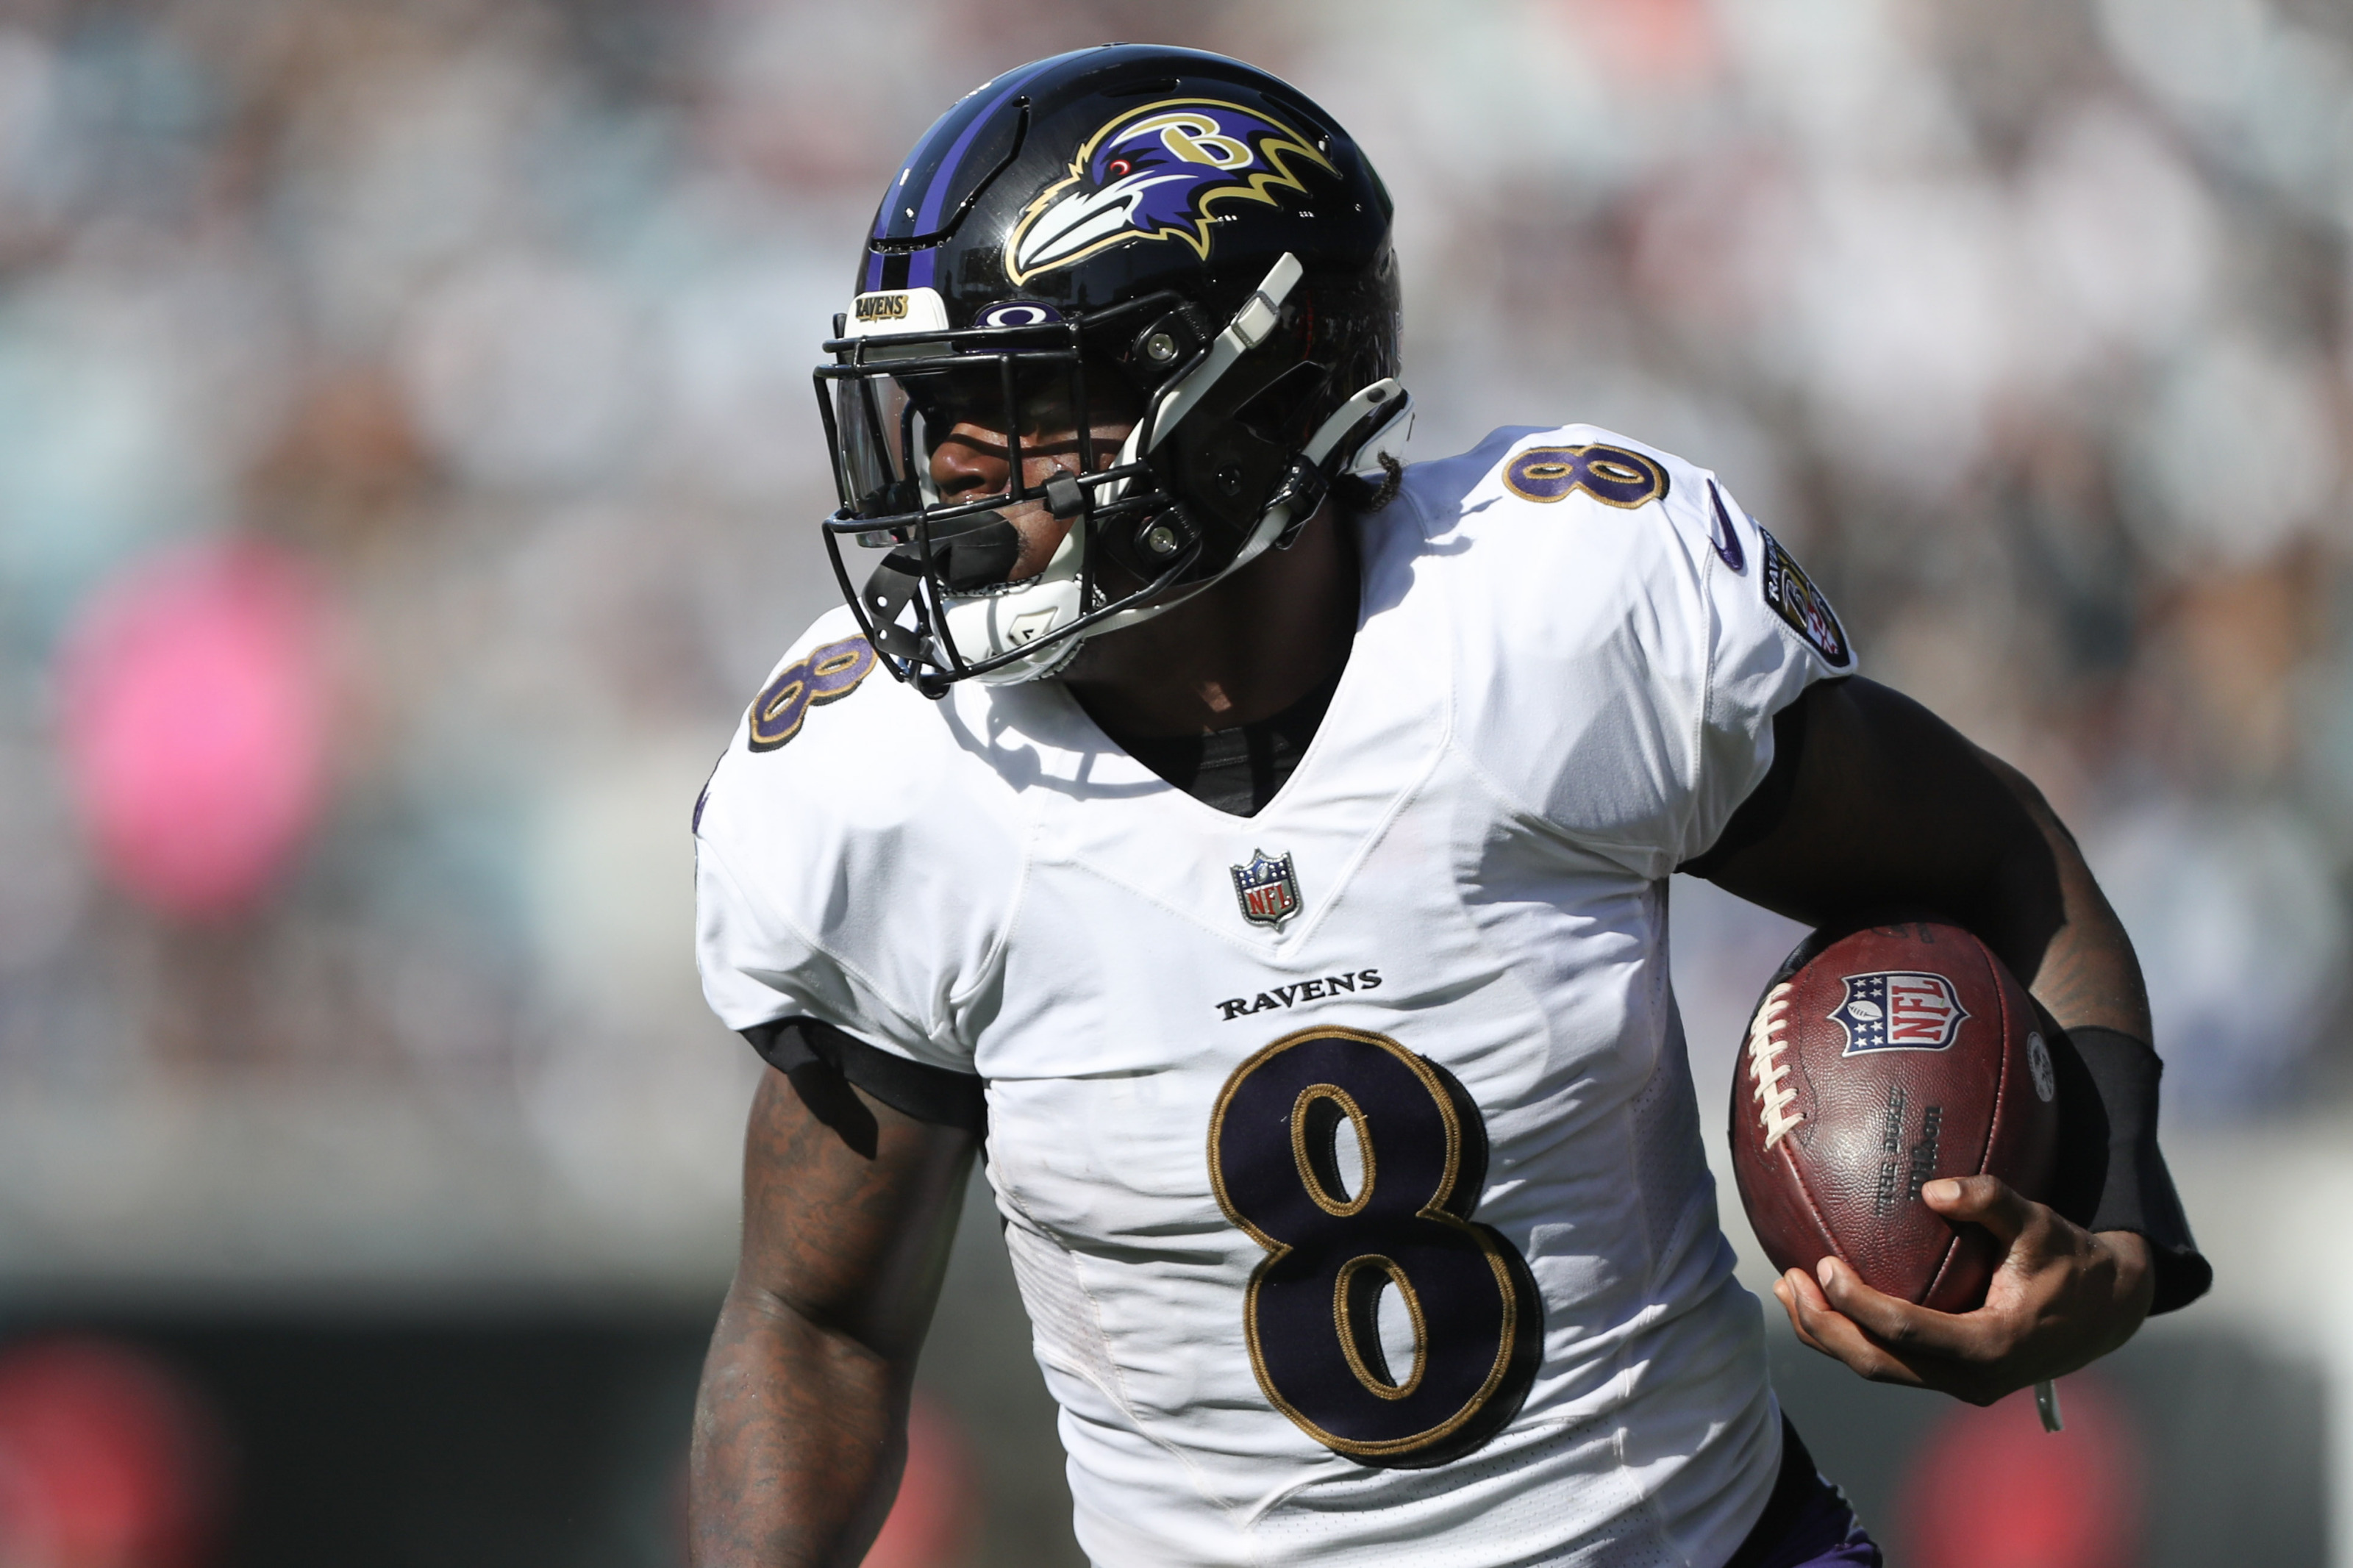 Lamar Jackson and the Ravens are headed for a dramatic standoff